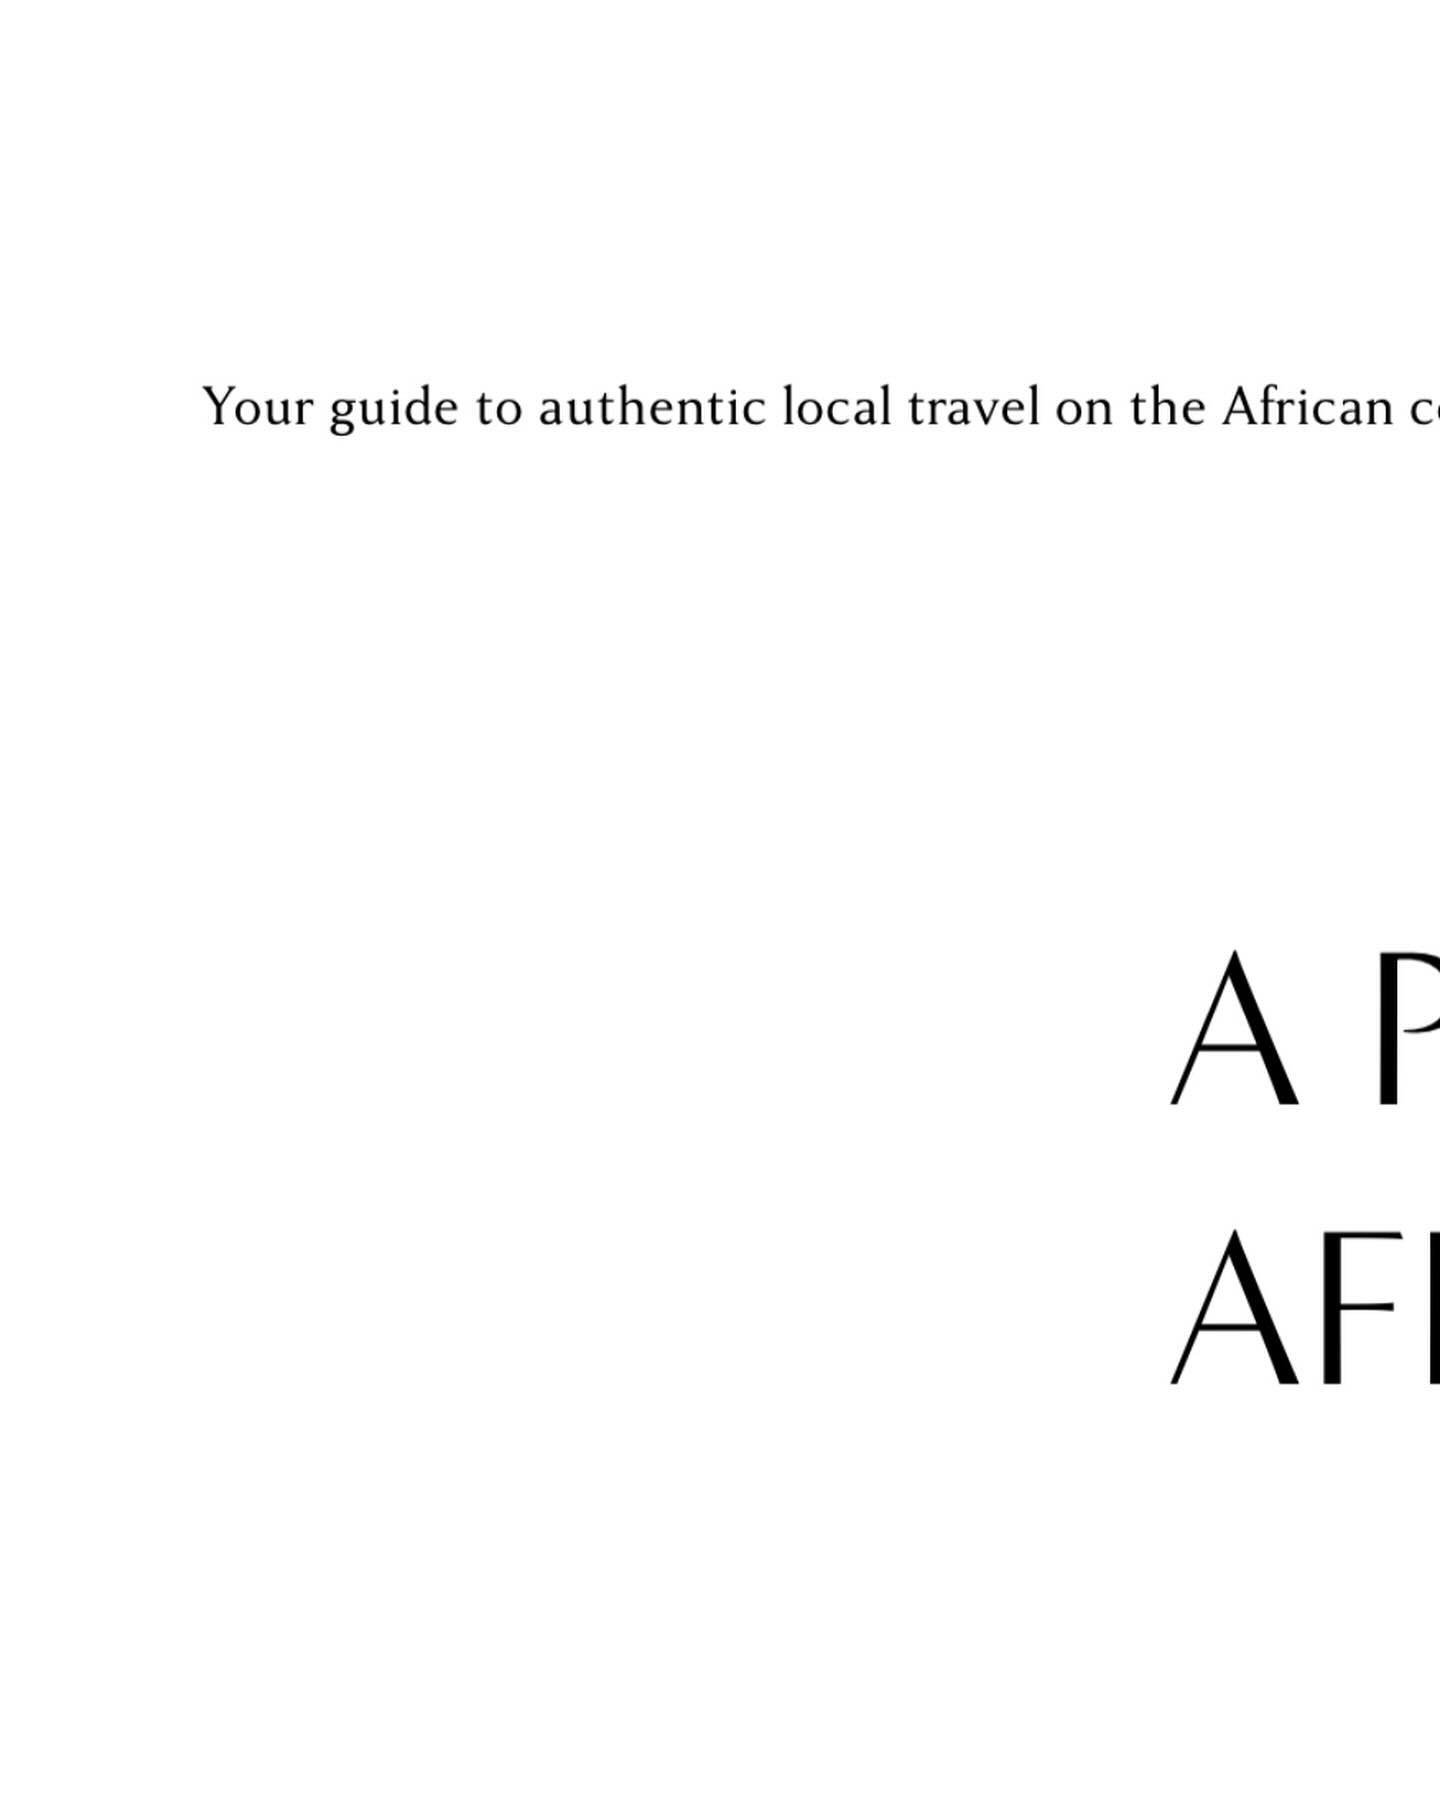 Our website is live! 

🌴 Summer is fast approaching so head to www.thepanafricanguide.com for ready-made vacation itineraries for African destinations, and custom travel services &mdash; like bookings and trip planning. 

✈️ Sign up for our newslett